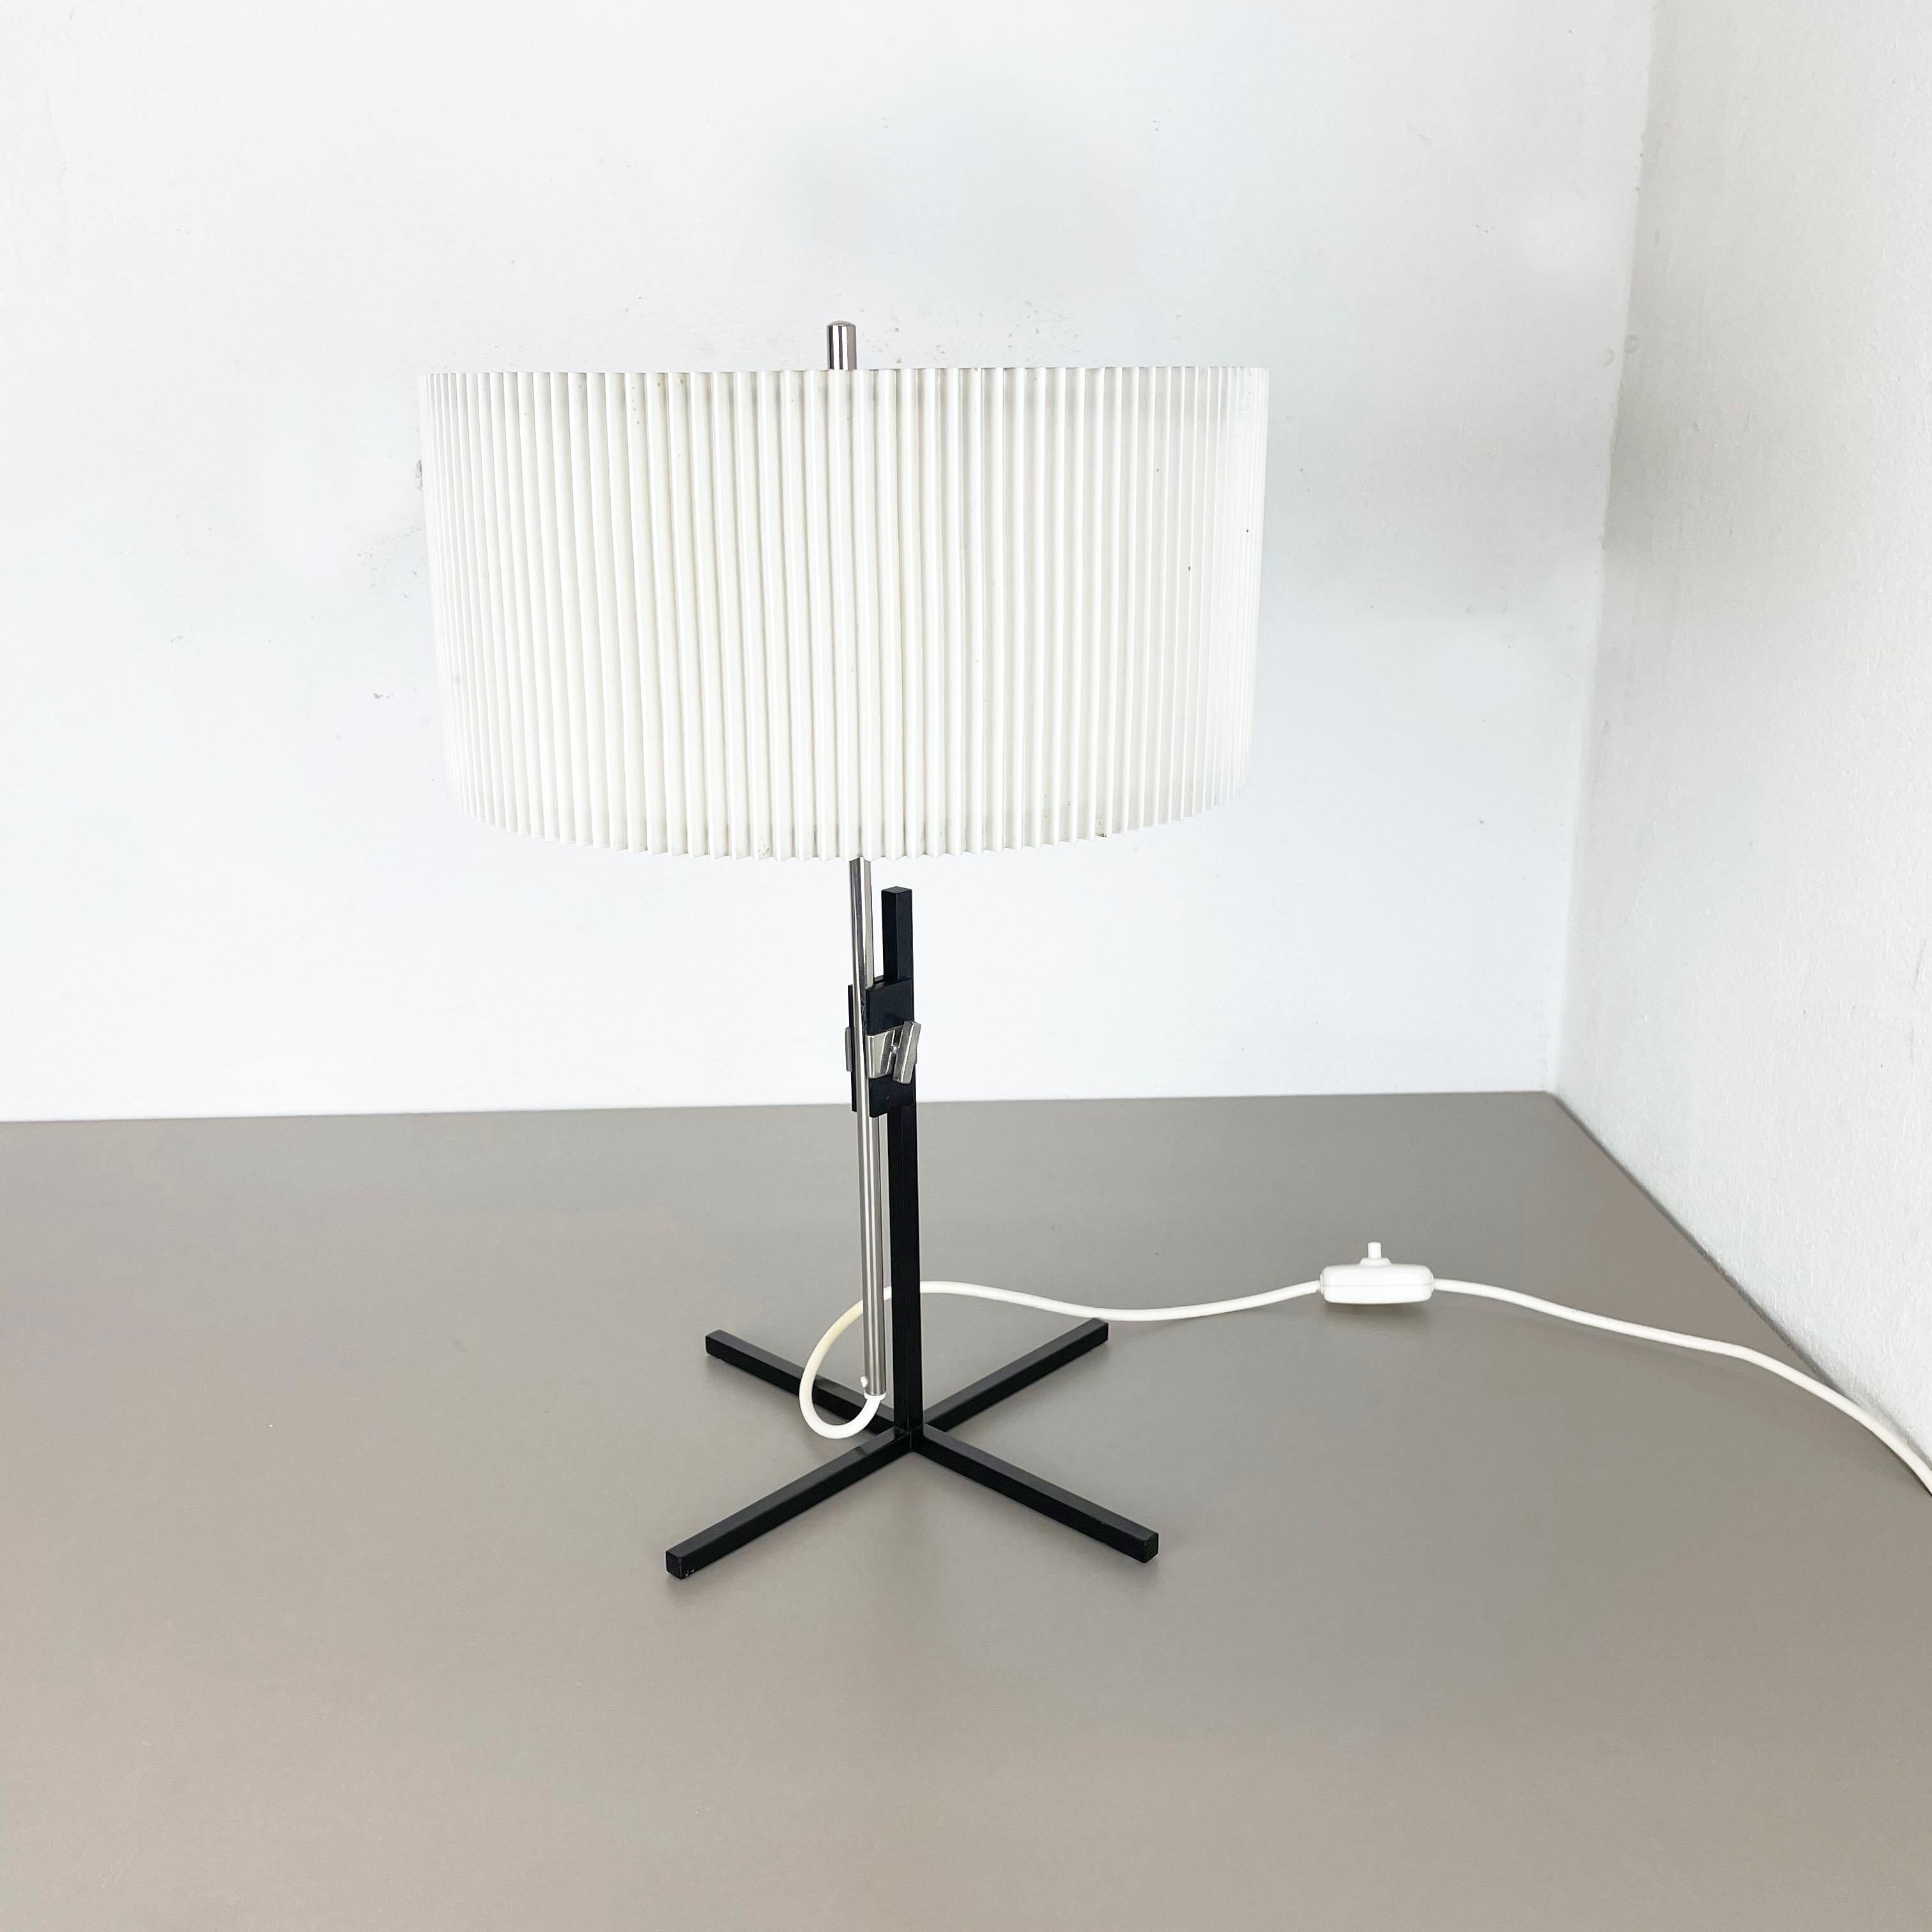 Article:

Table light


Producer:

Kaiser Leuchten, Germany


Origin:

Germany



Age:

1960s






This 1960s table light was made by Kaiser Leuchten in Germany. The light base is made of solid metal in black lacquer and